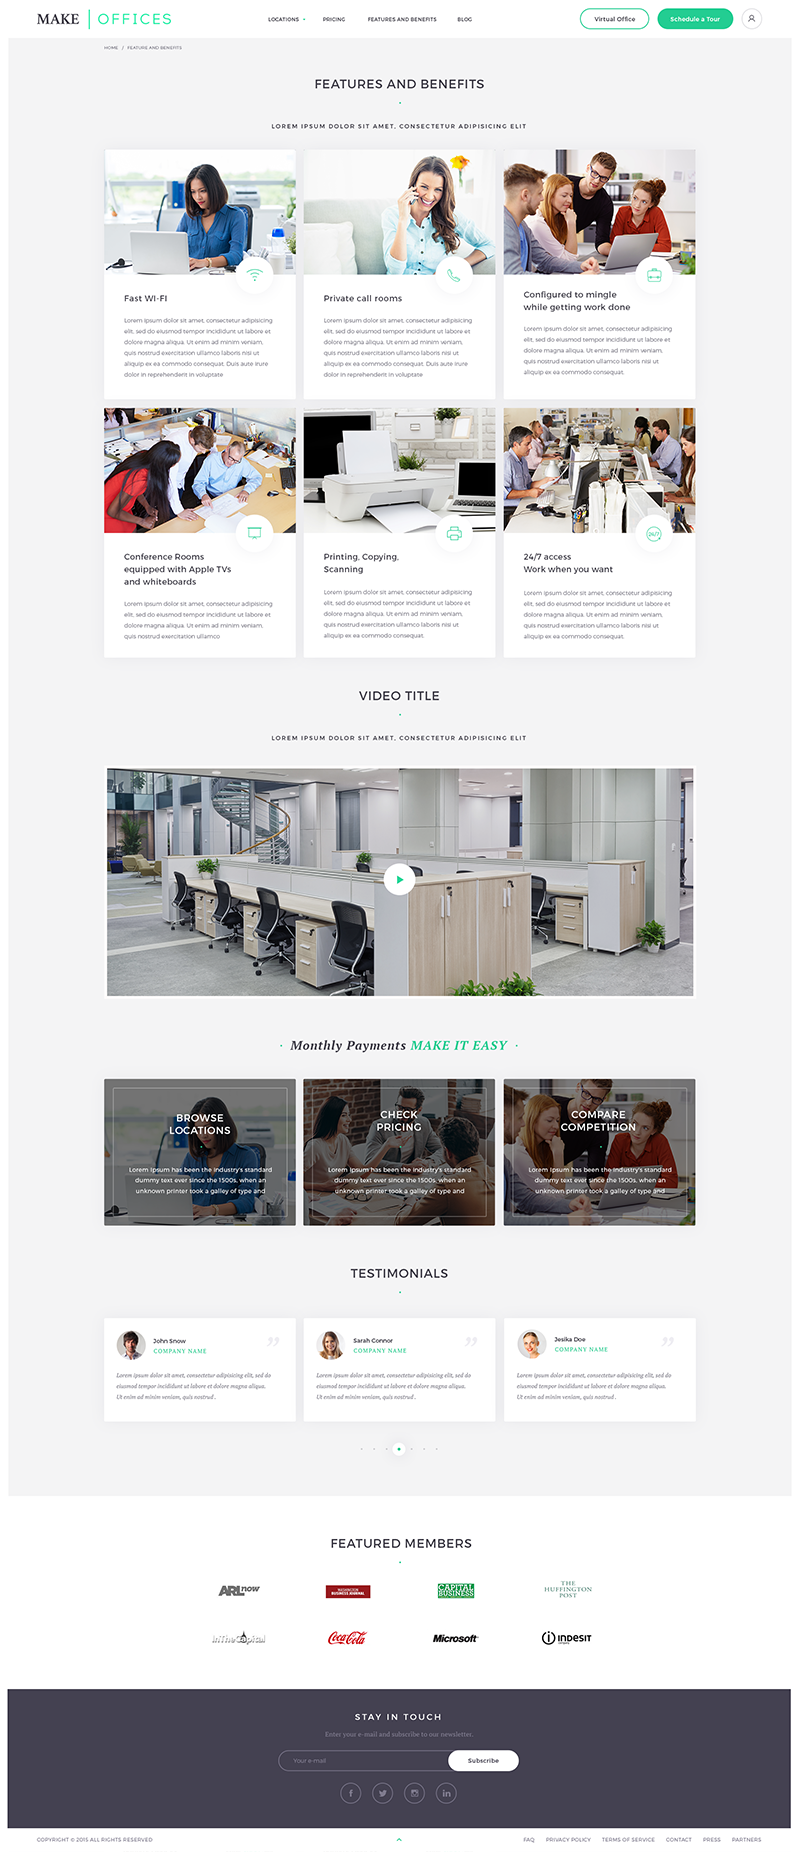 Make Offices's Inner Pages Design and Development